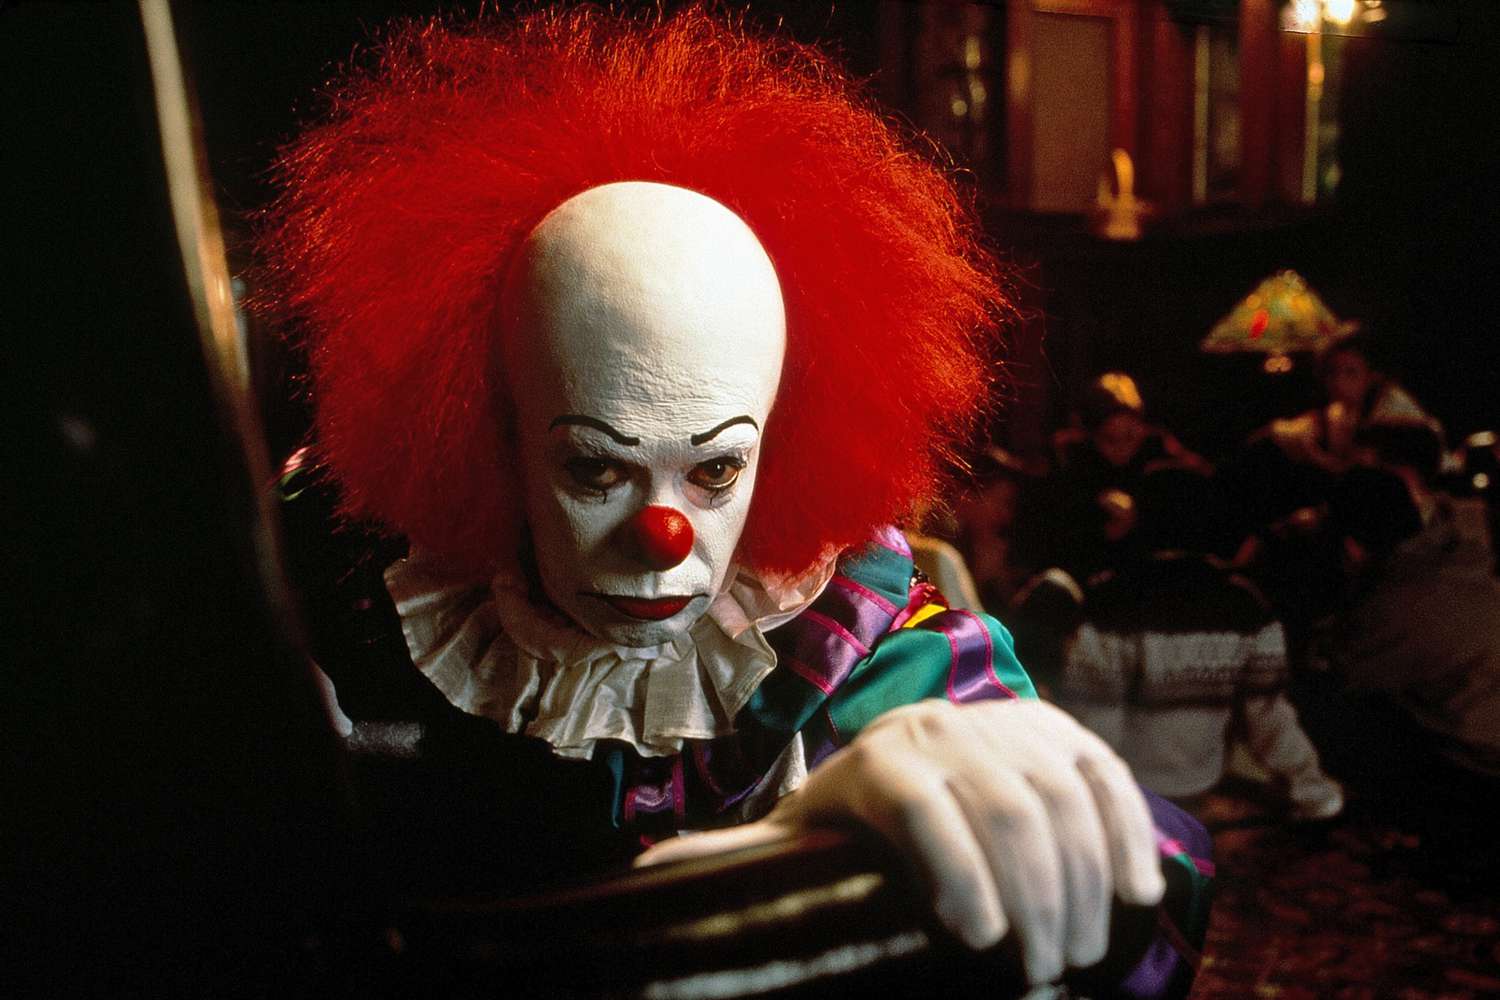 IT, Tim Curry as Pennywise the Clown, 1990